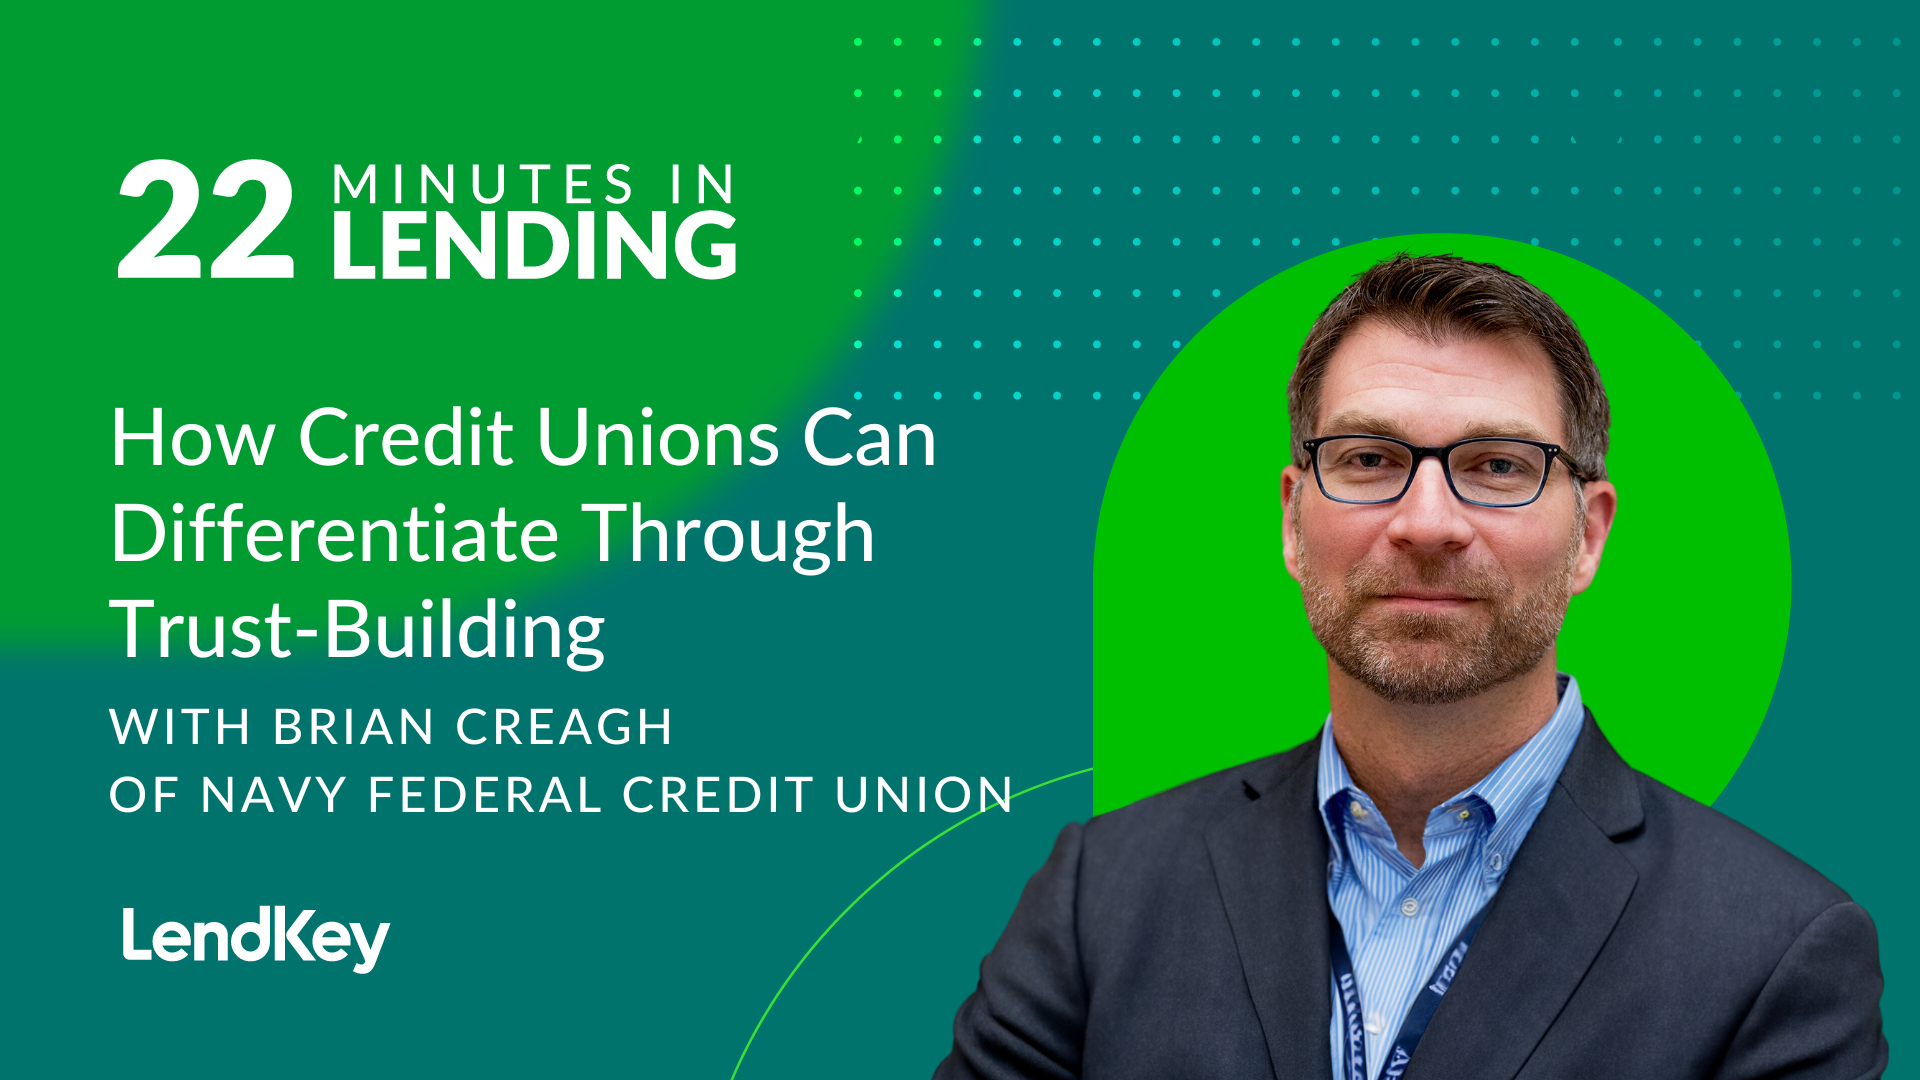 Featured image for “How Credit Unions Can Differentiate Through Trust-Building”